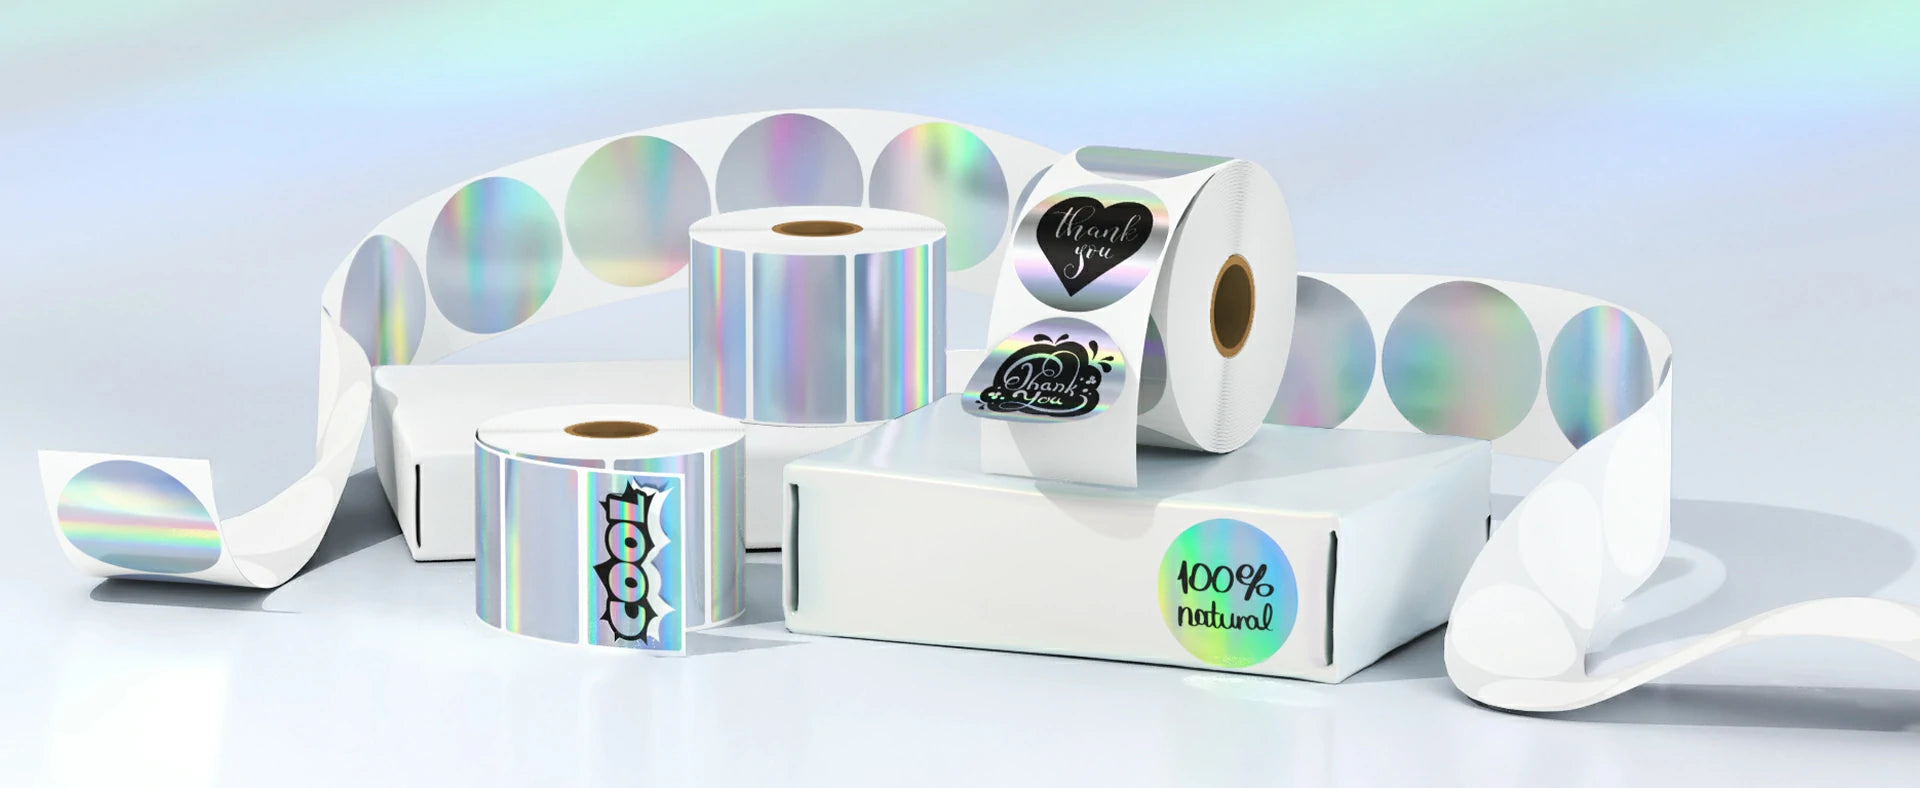 MUNBYN provides holographic silver thermal labels, available in round and rectangular shapes.